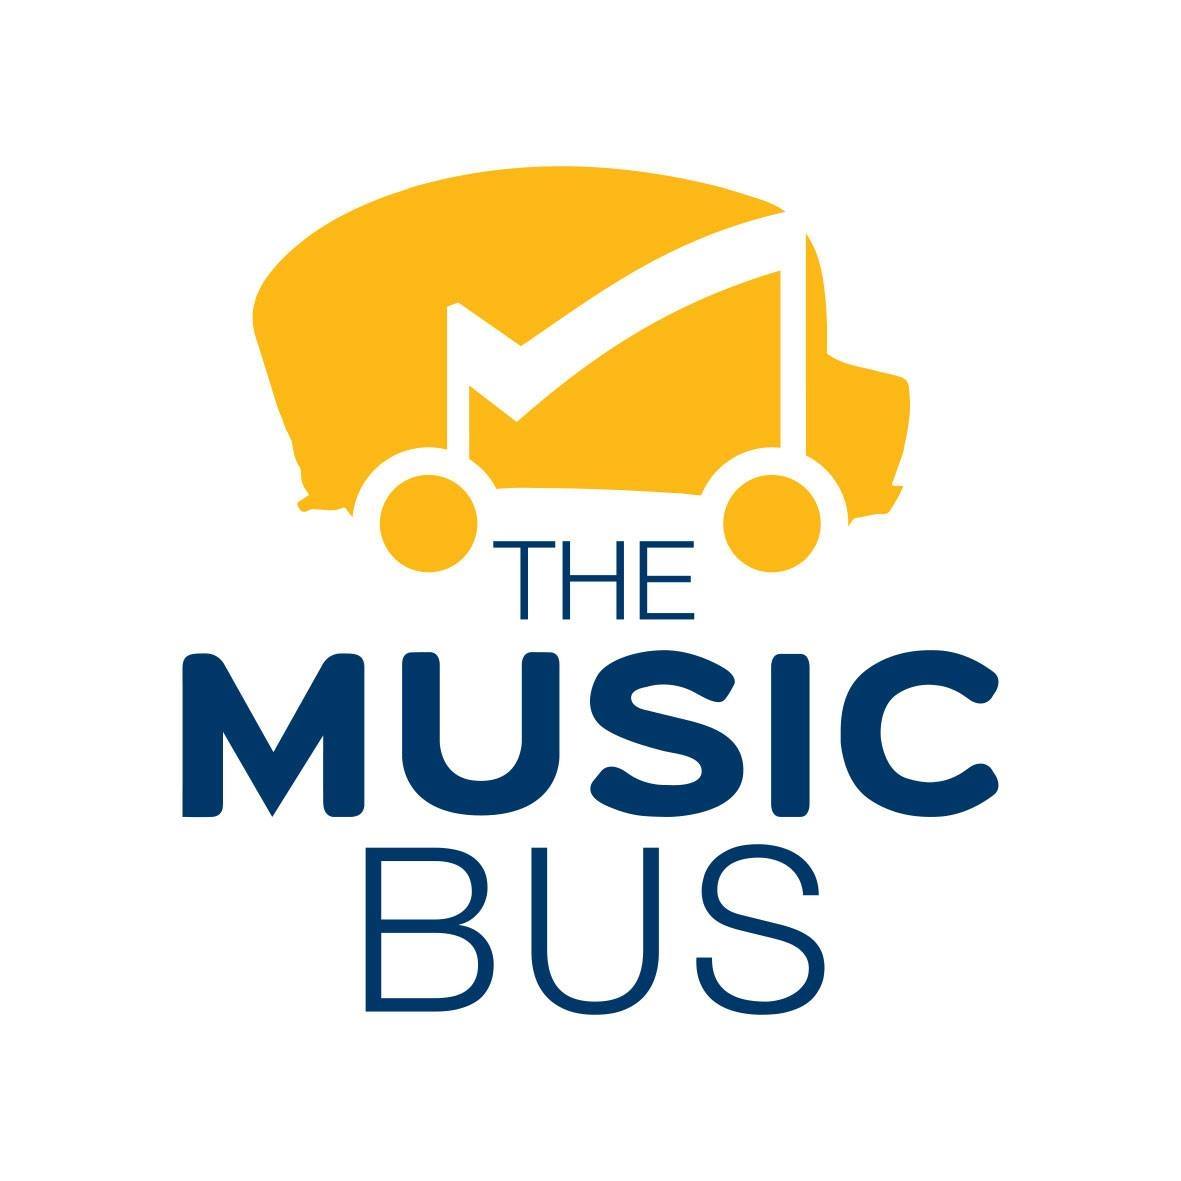 The Music Bus